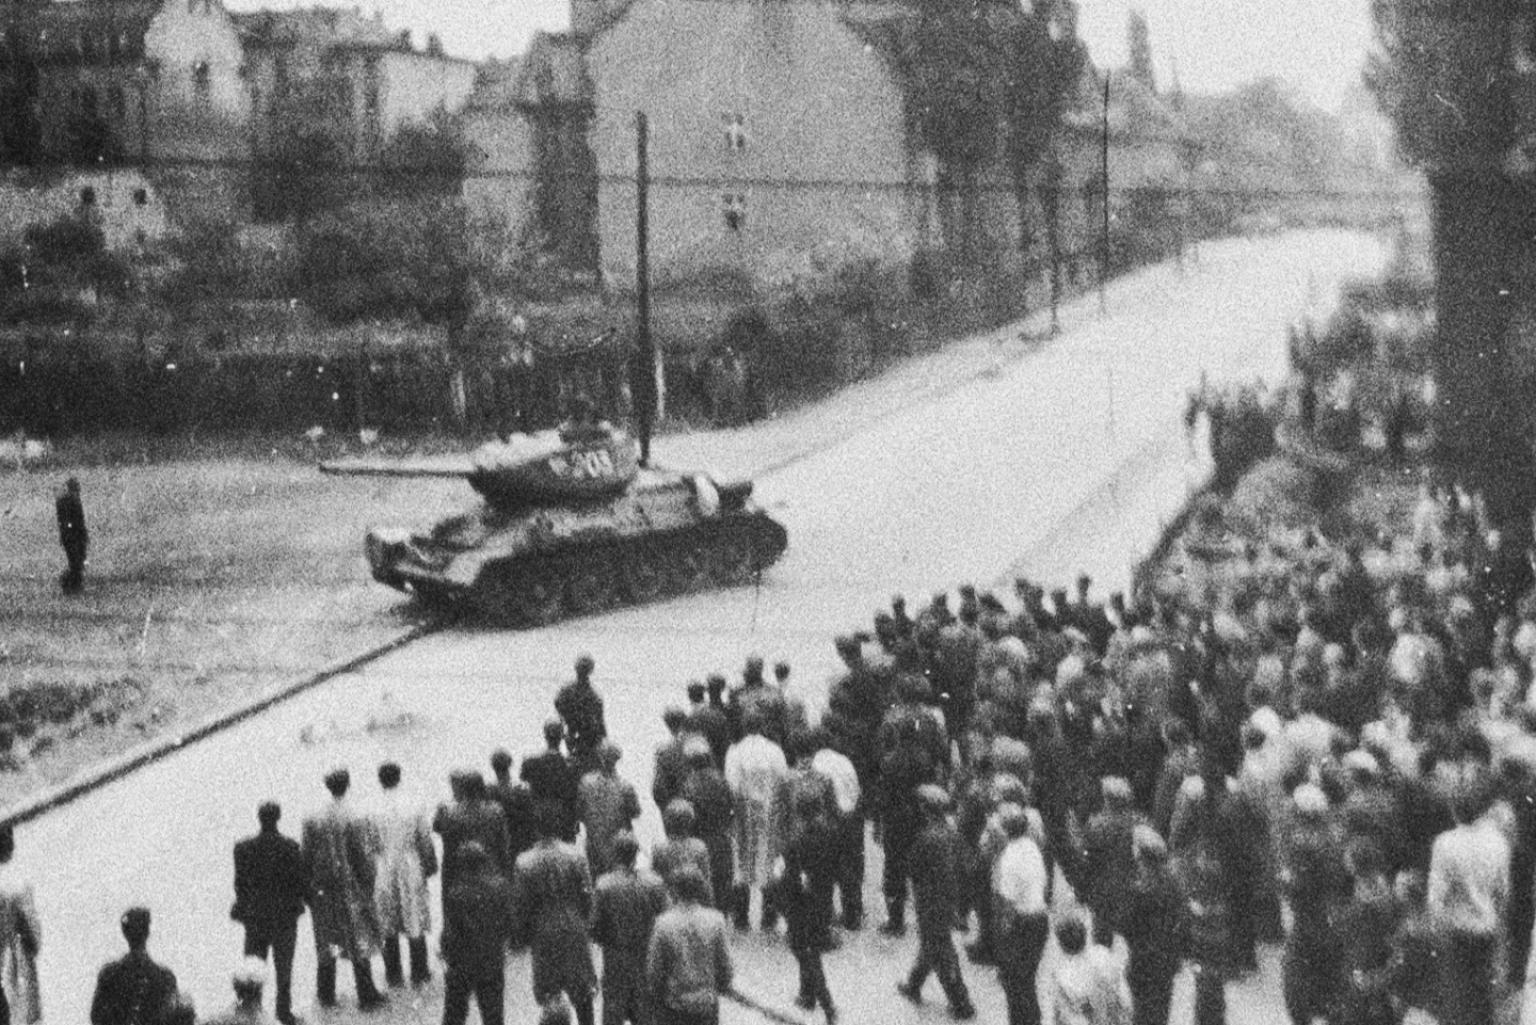 Archive picture: A crowd moves towards a tank standing on a street corner.